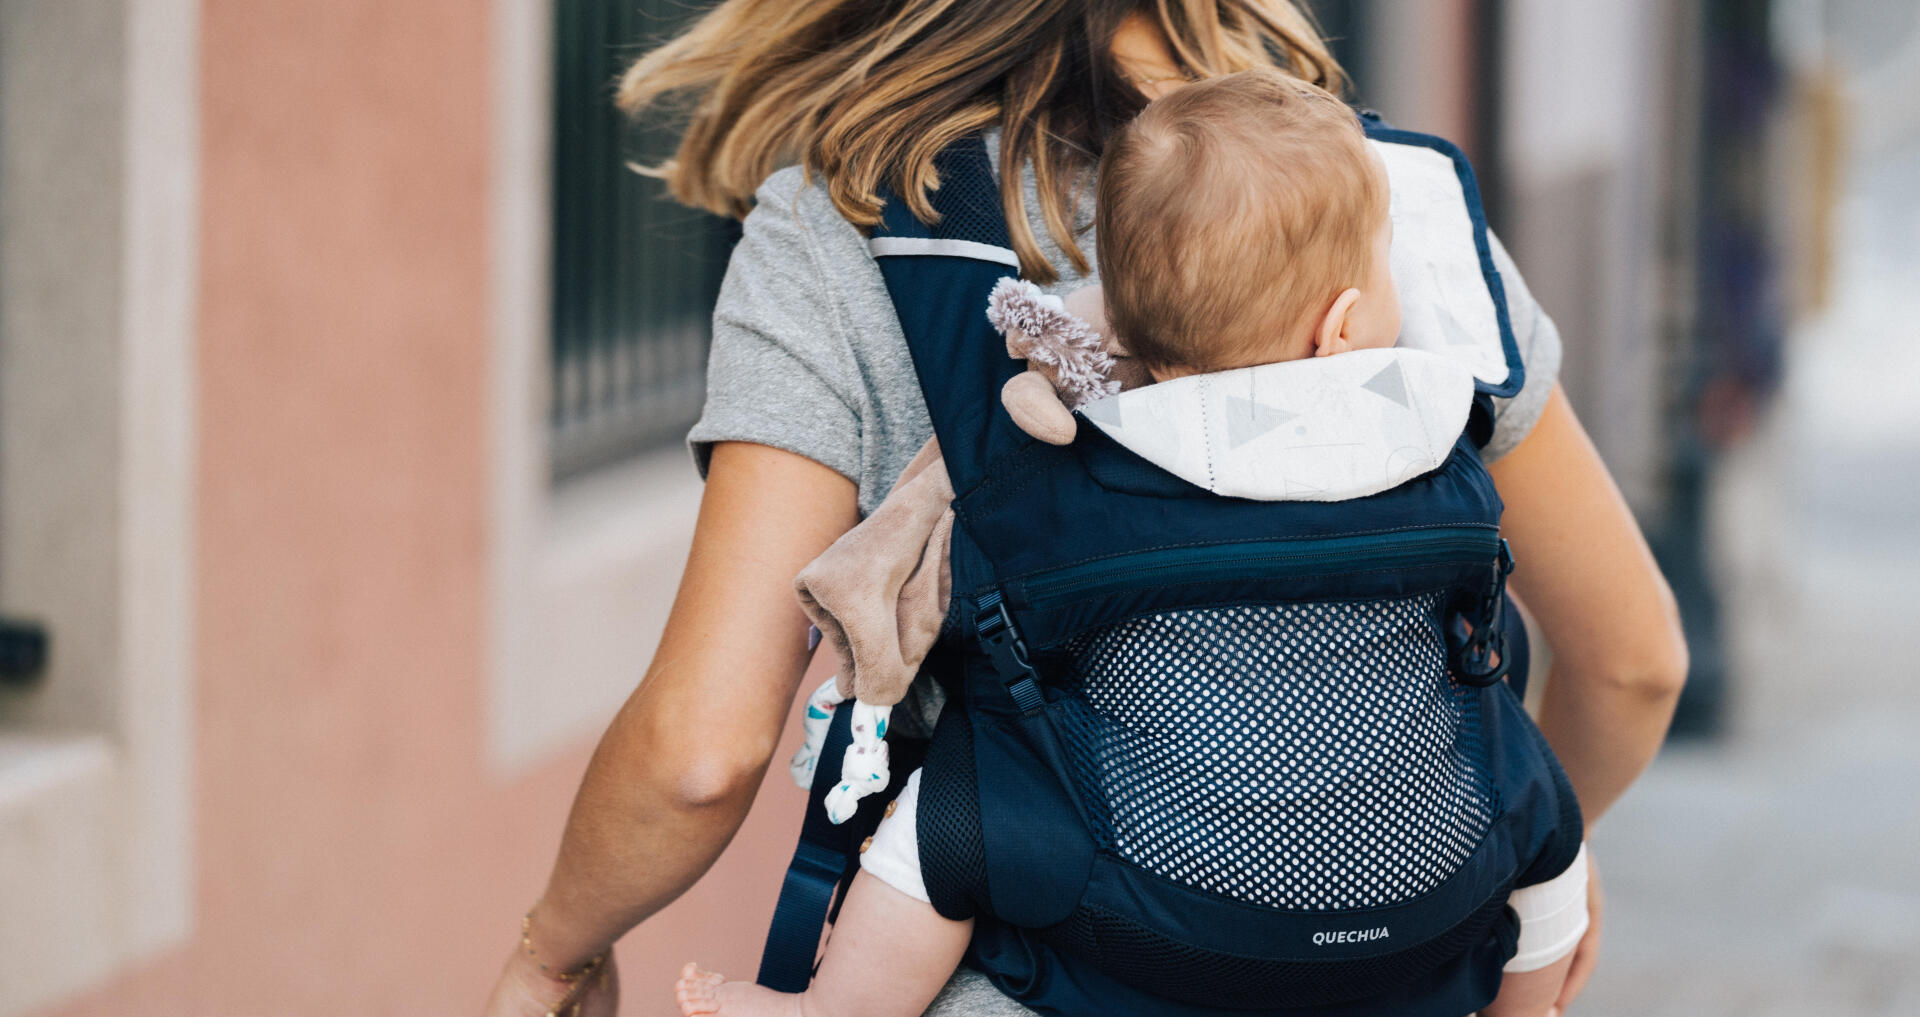 10 good reasons why you should go hiking with your baby